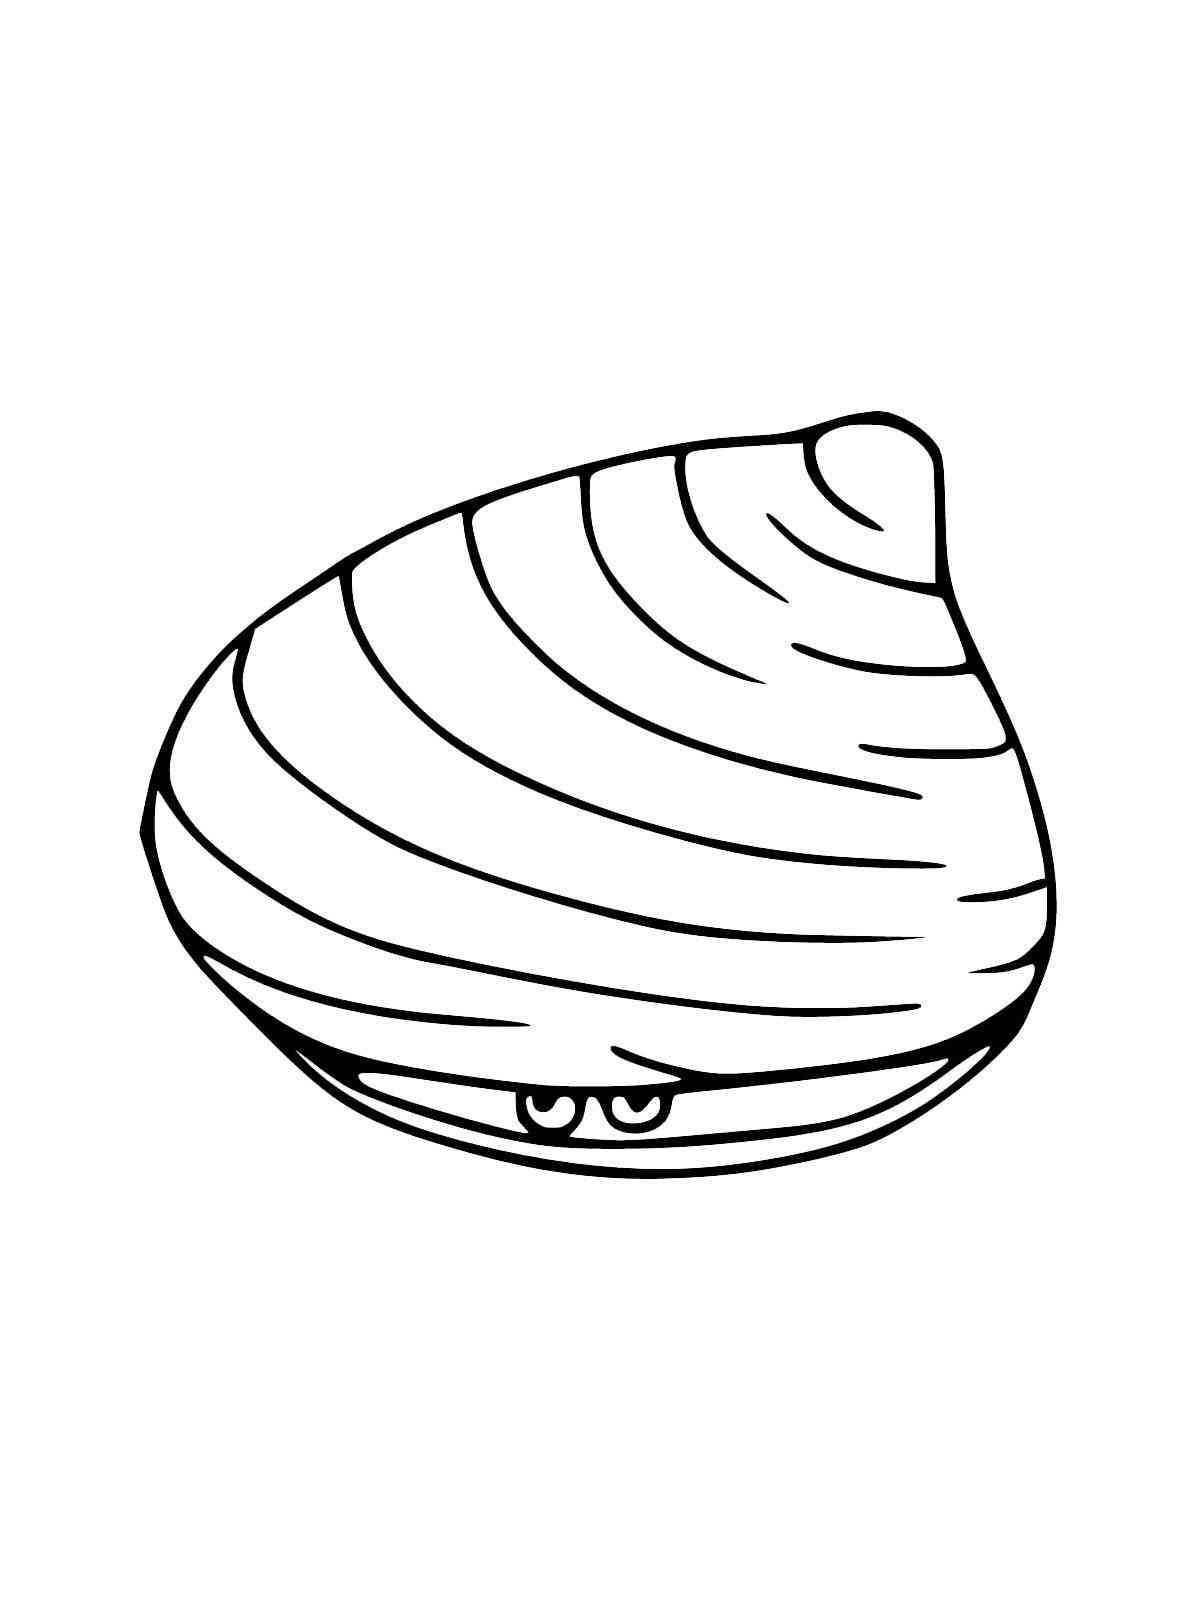 Clam 9 coloring page